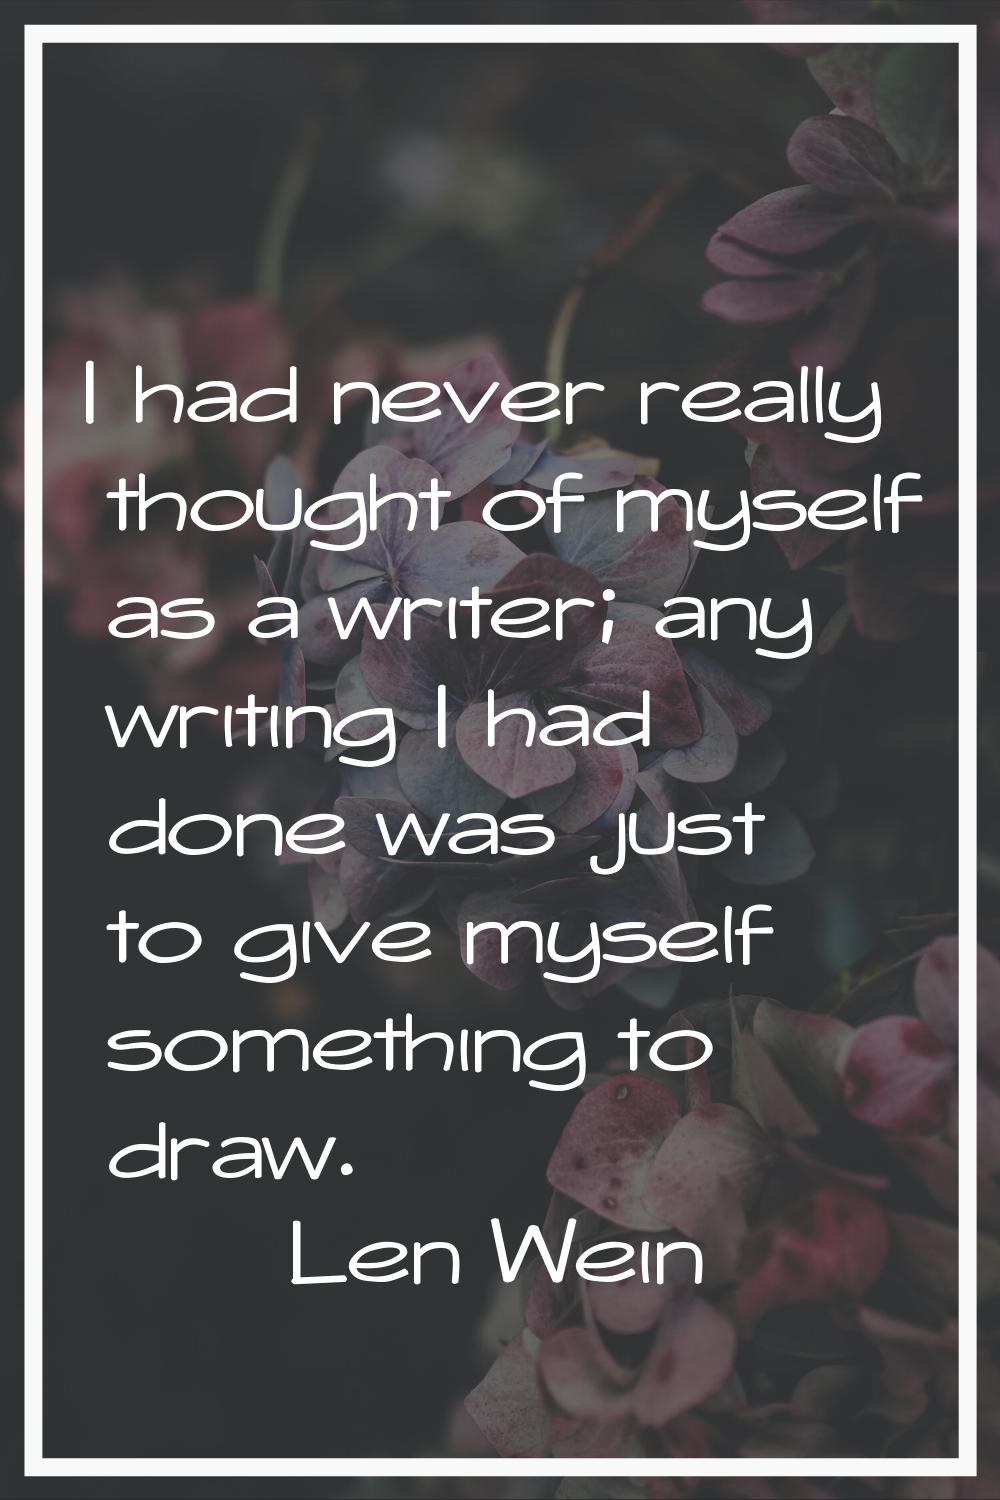 I had never really thought of myself as a writer; any writing I had done was just to give myself so